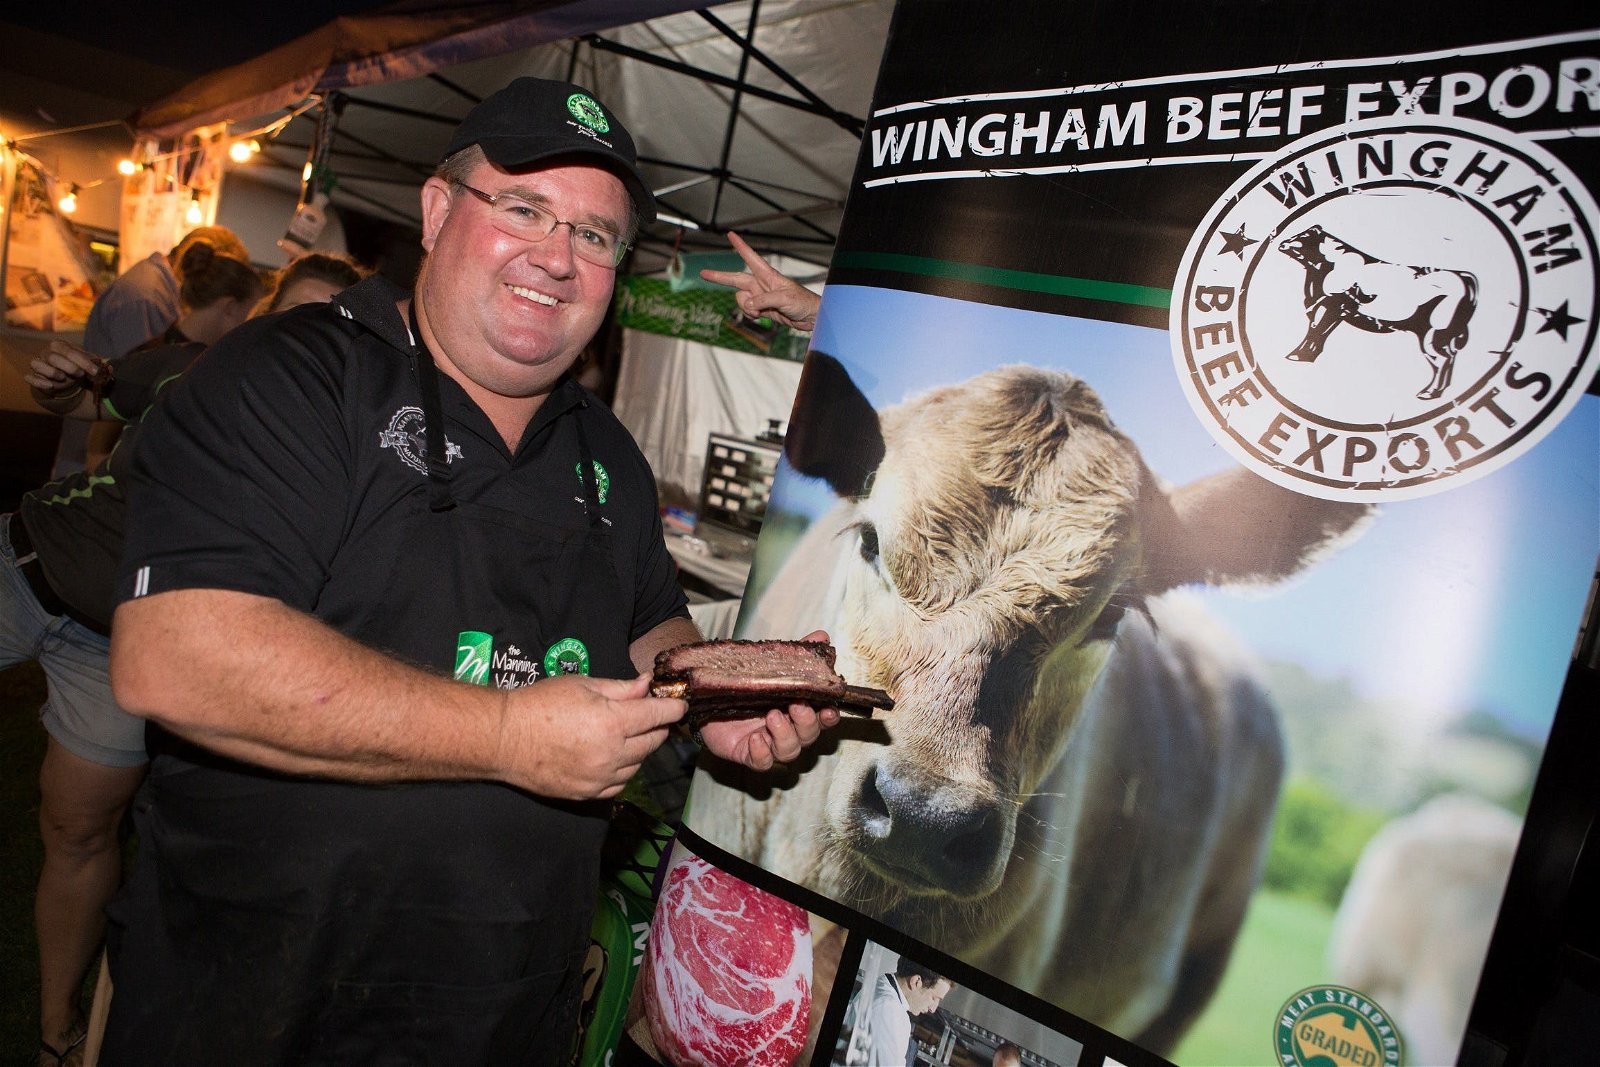 Wingham Beef Exports - Food Delivery Shop